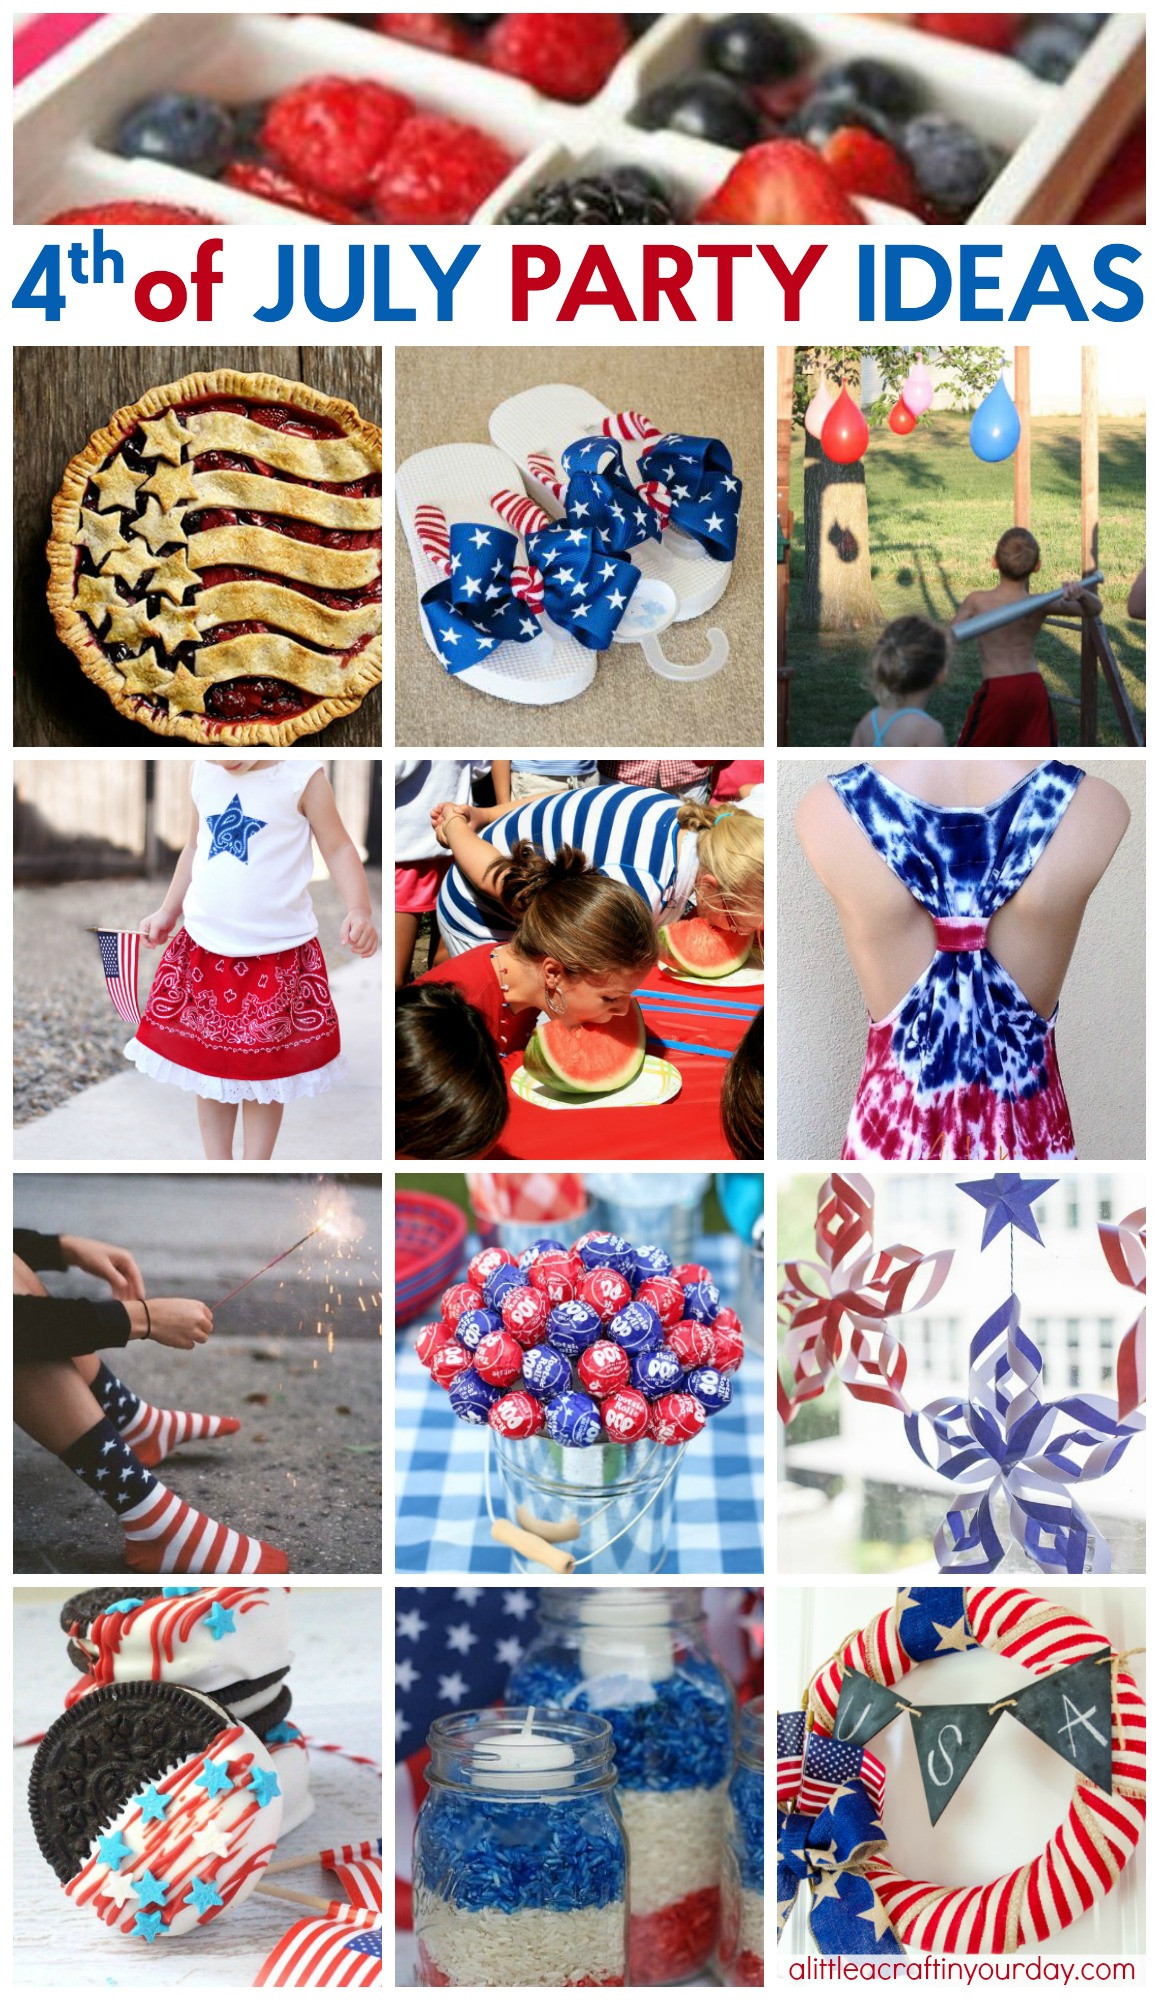 4th Of July Celebration Ideas
 44 Way Cool Fourth of July Party Ideas A Little Craft In